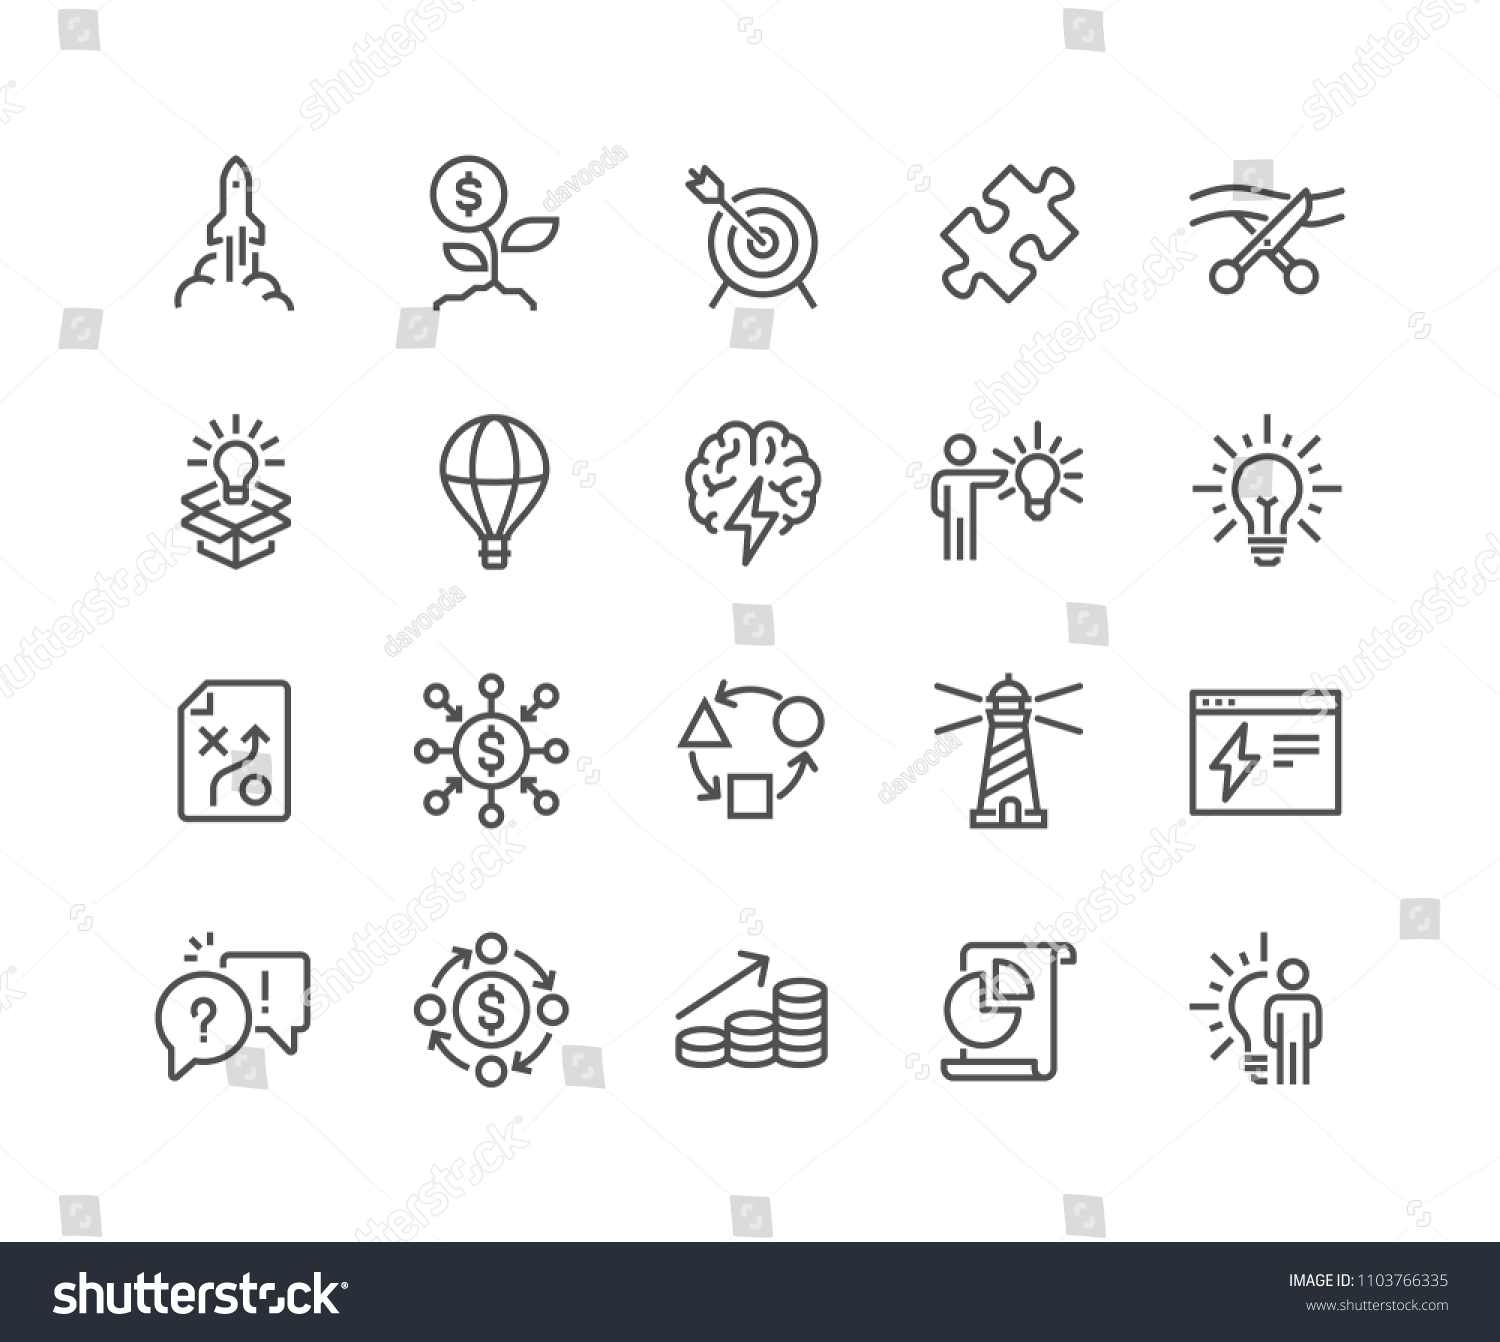 Simple Set of Startup Related Vector Line Icons. 
Contains such Icons as Goal, Out of the Box Idea, Launch Project and more.
Editable Stroke. 48x48 Pixel Perfect.
 #1103766335